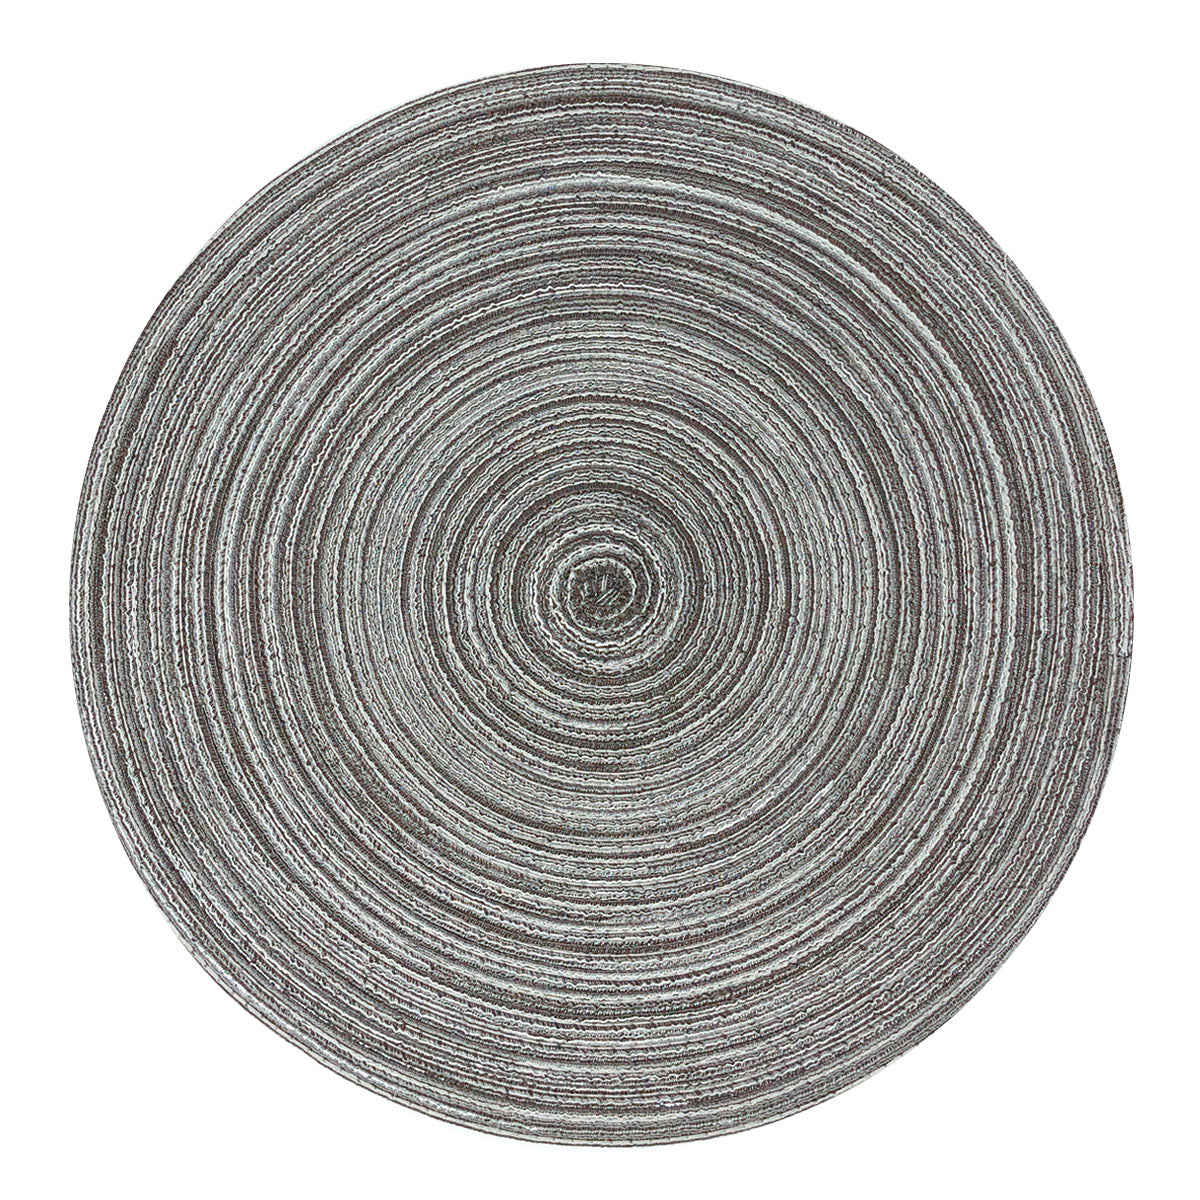 Wrapables 15" Woven Round Placemats (Set of 6)